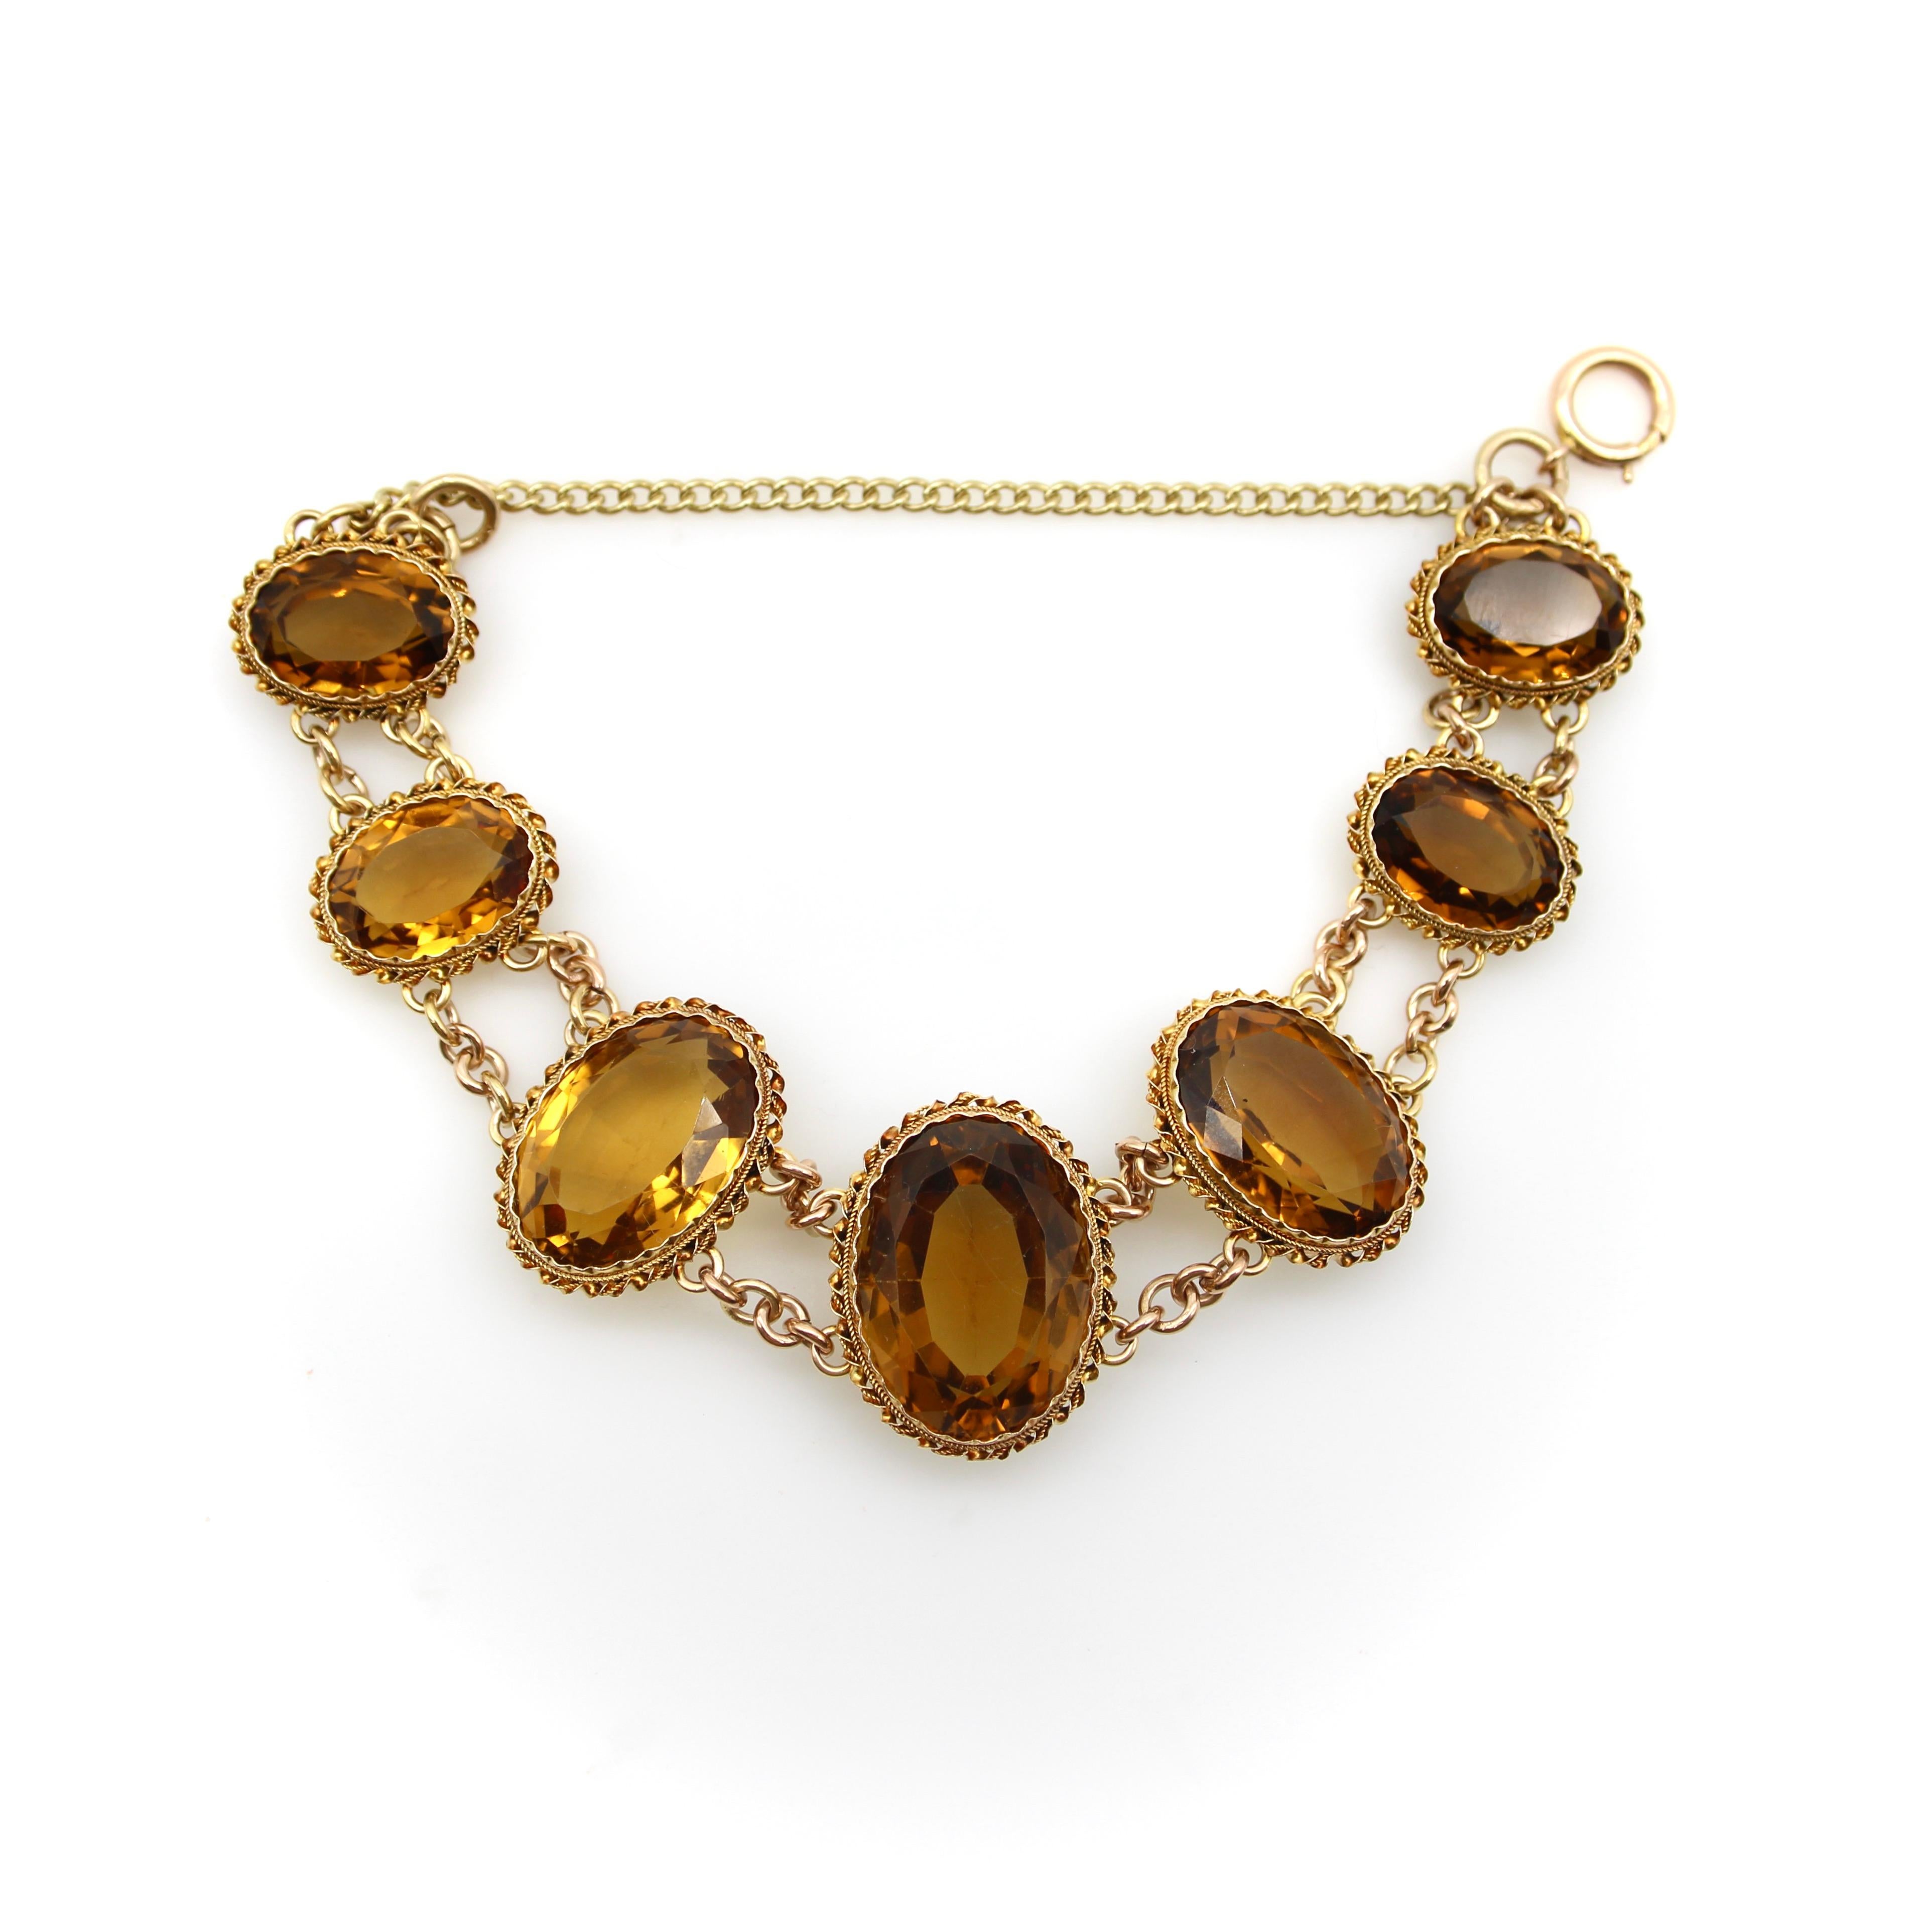 What makes this Victorian 14k gold bracelet so beautiful are the magnificent, well-matched amber hued citrine gemstones that have stunning presence on the wrist. The stones graduate in size with the largest stone as the centerpiece, measuring 22 x